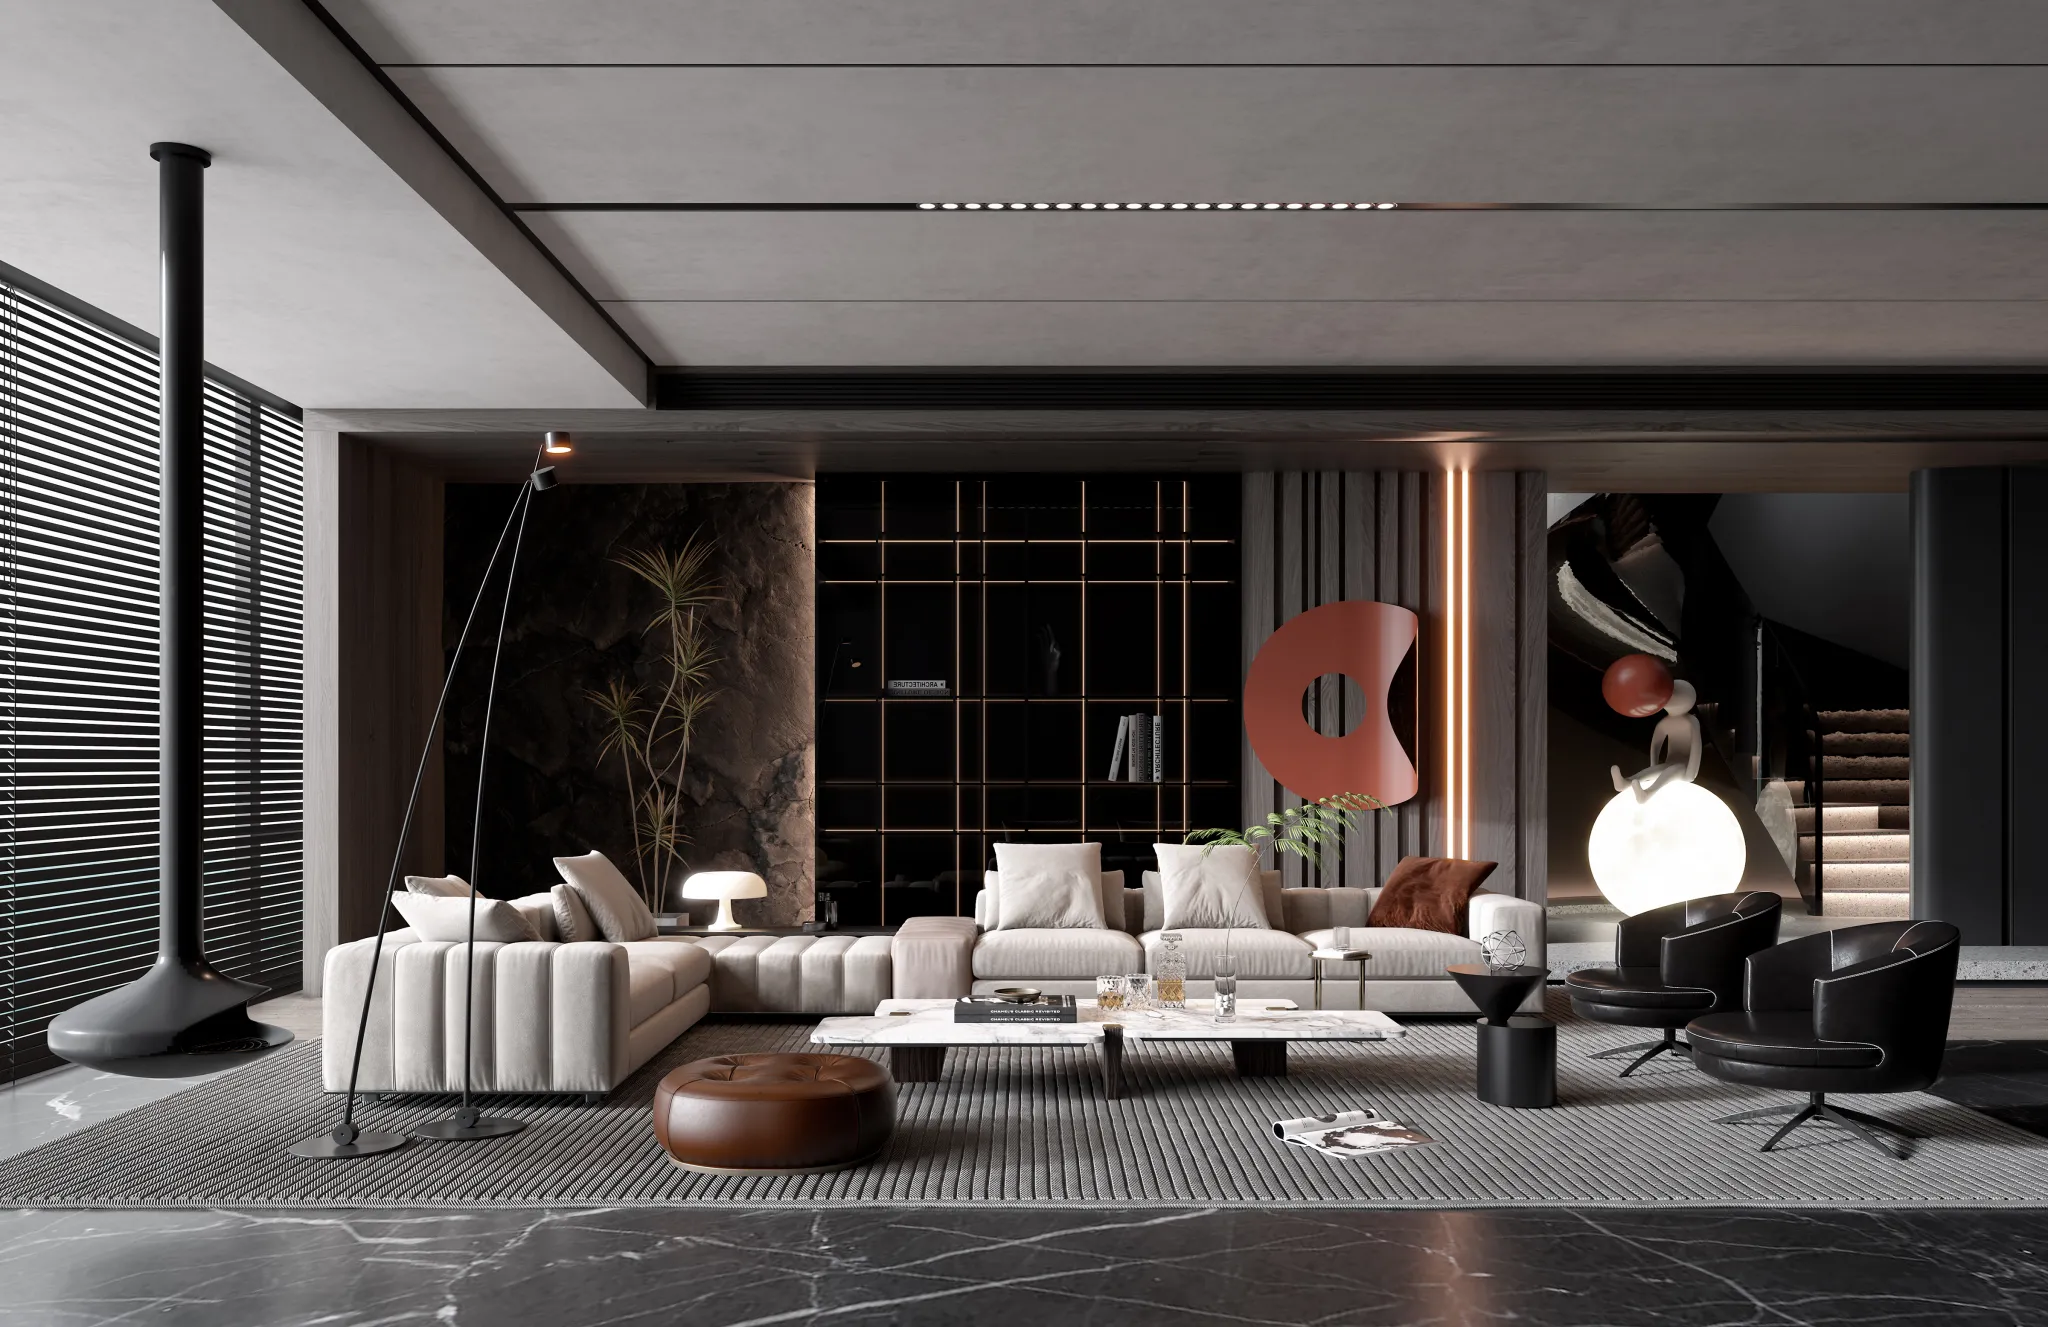 HOUSE SPACE 3D SCENES – LIVING ROOM – 0188